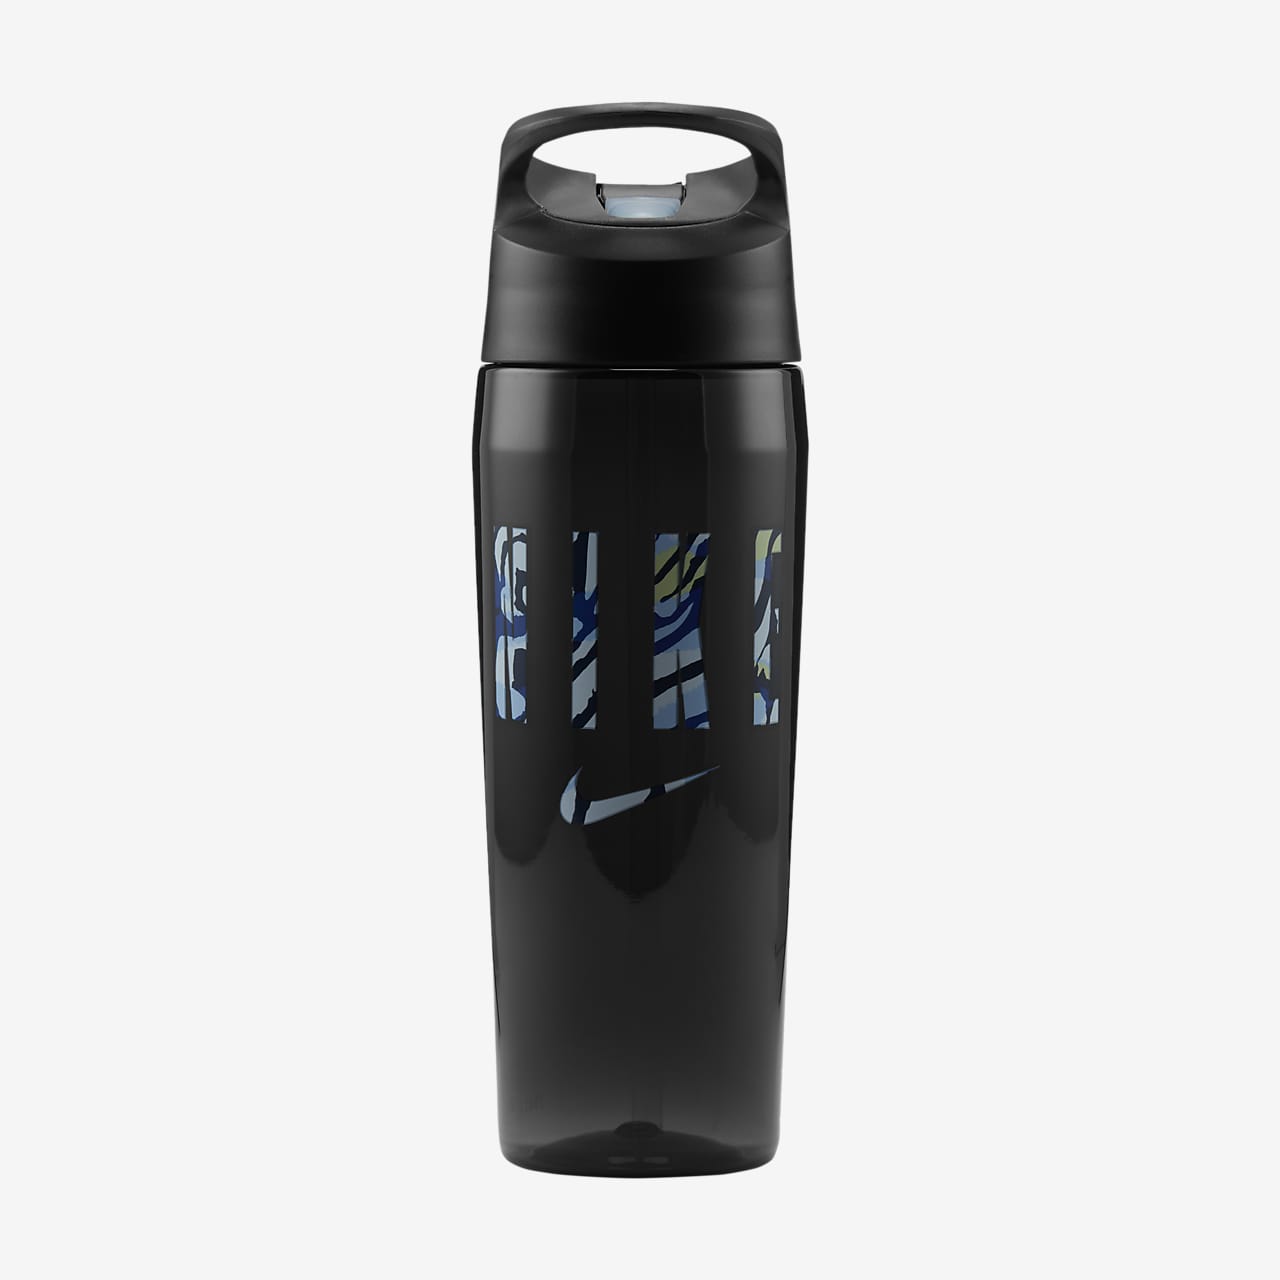 https://static.nike.com/a/images/t_PDP_1280_v1/f_auto/01edcda2-68f3-4659-9140-7e2eebcee0bf/24oz-tr-hypercharge-straw-water-bottle-rXD8HZ.png